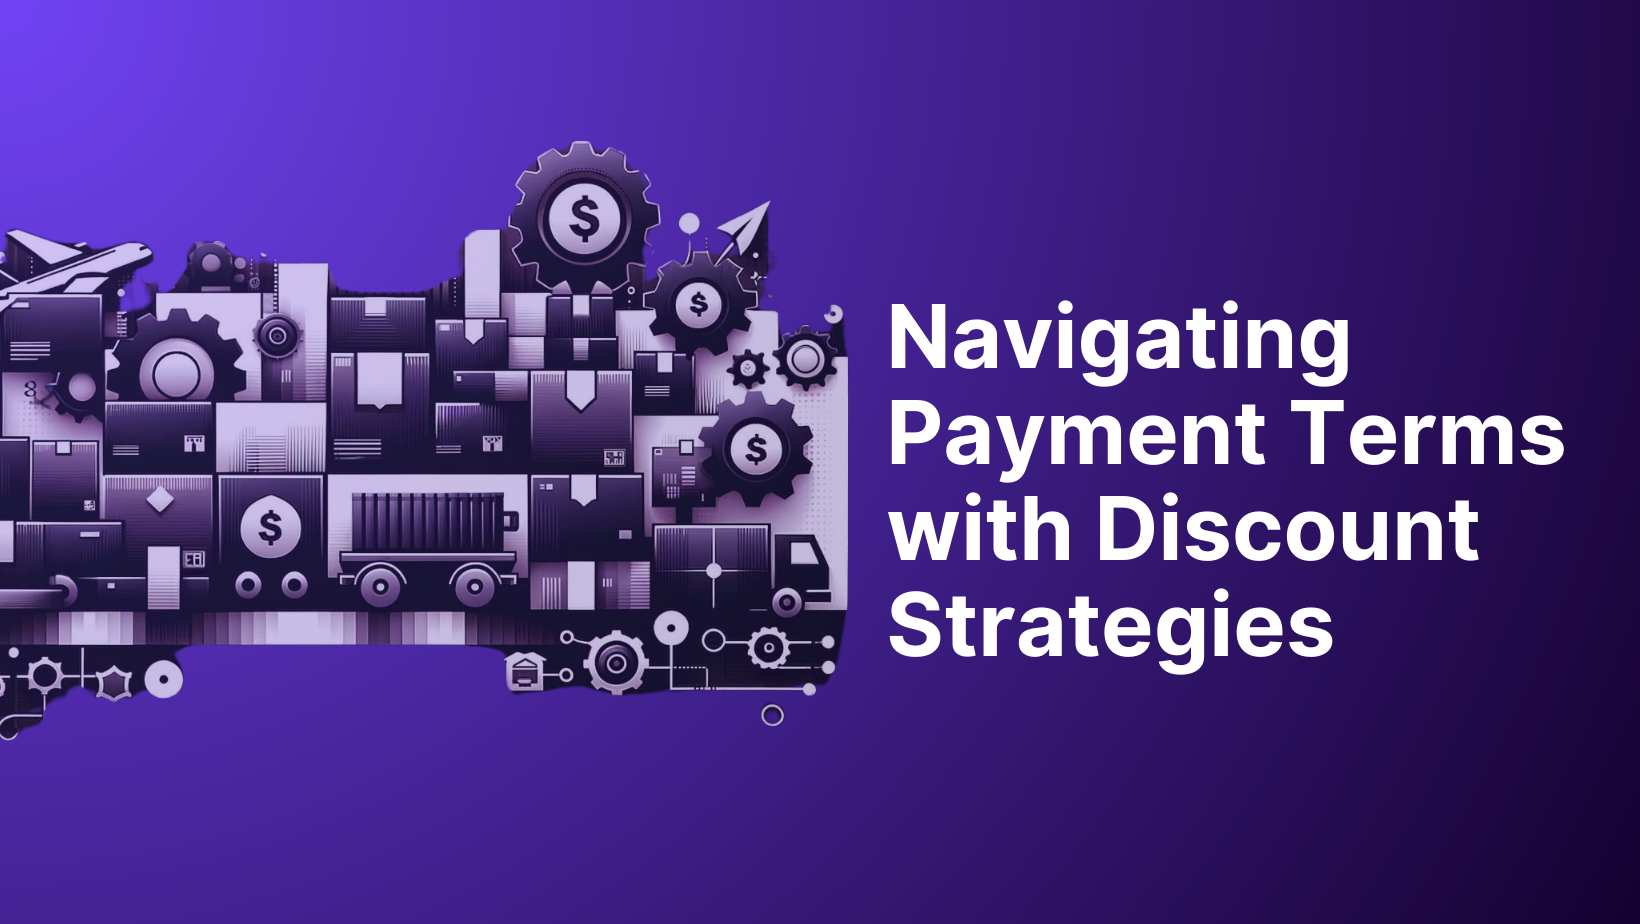 Navigating Payment Terms with Discount Strategies Cover